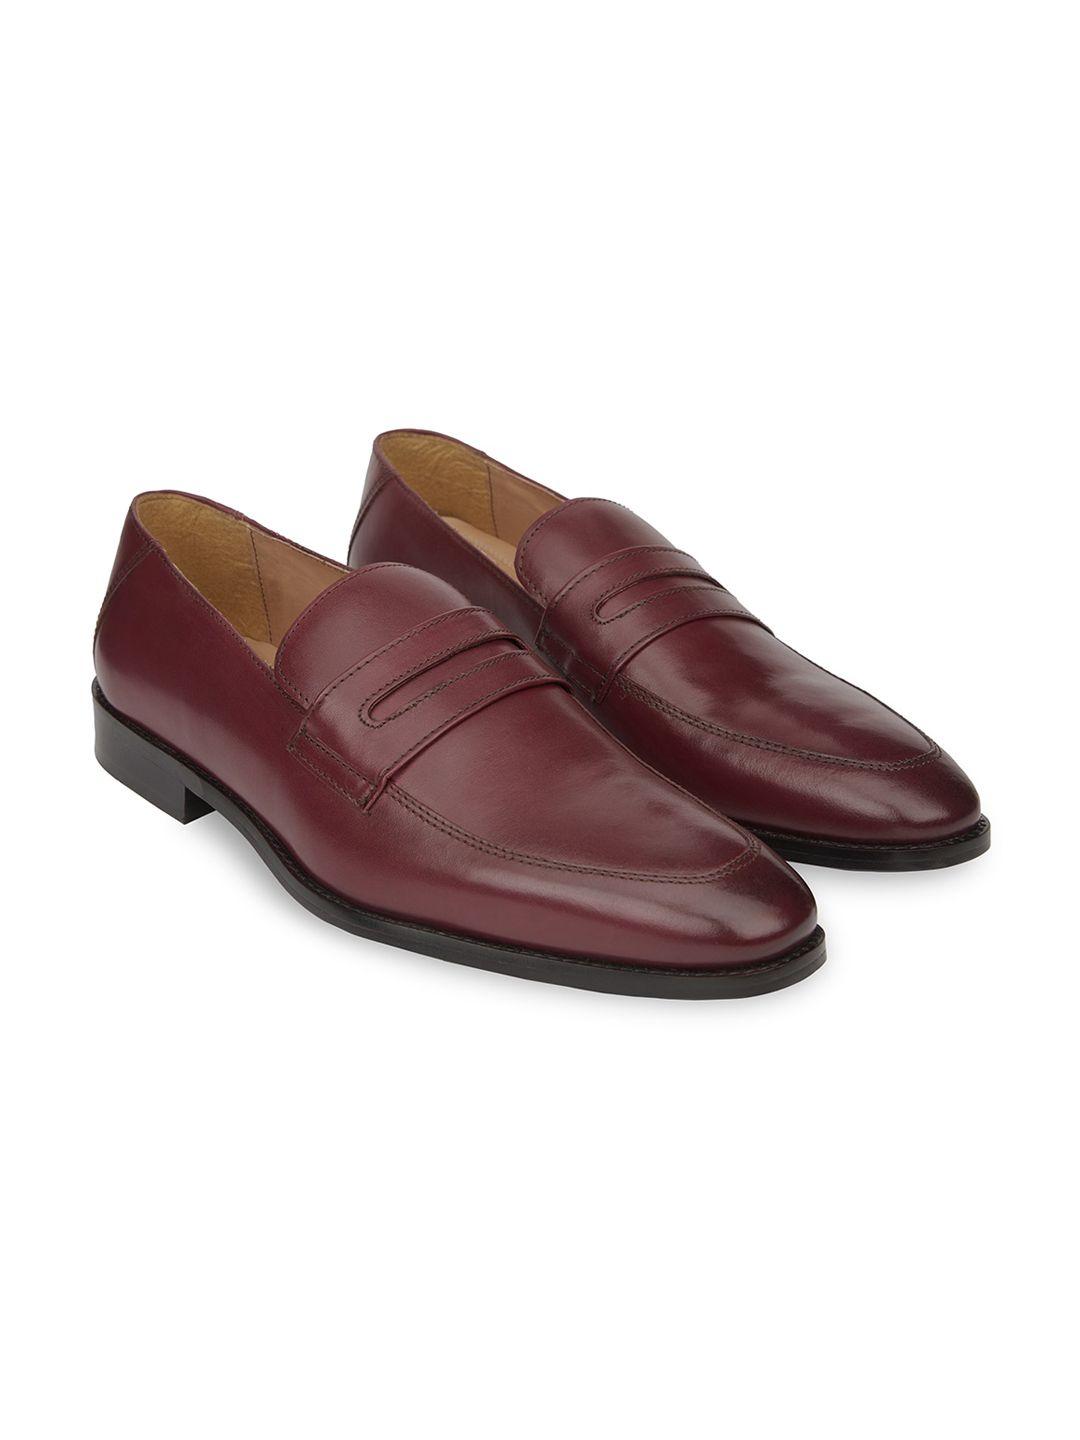 hats off accessories leather formal slip on shoes